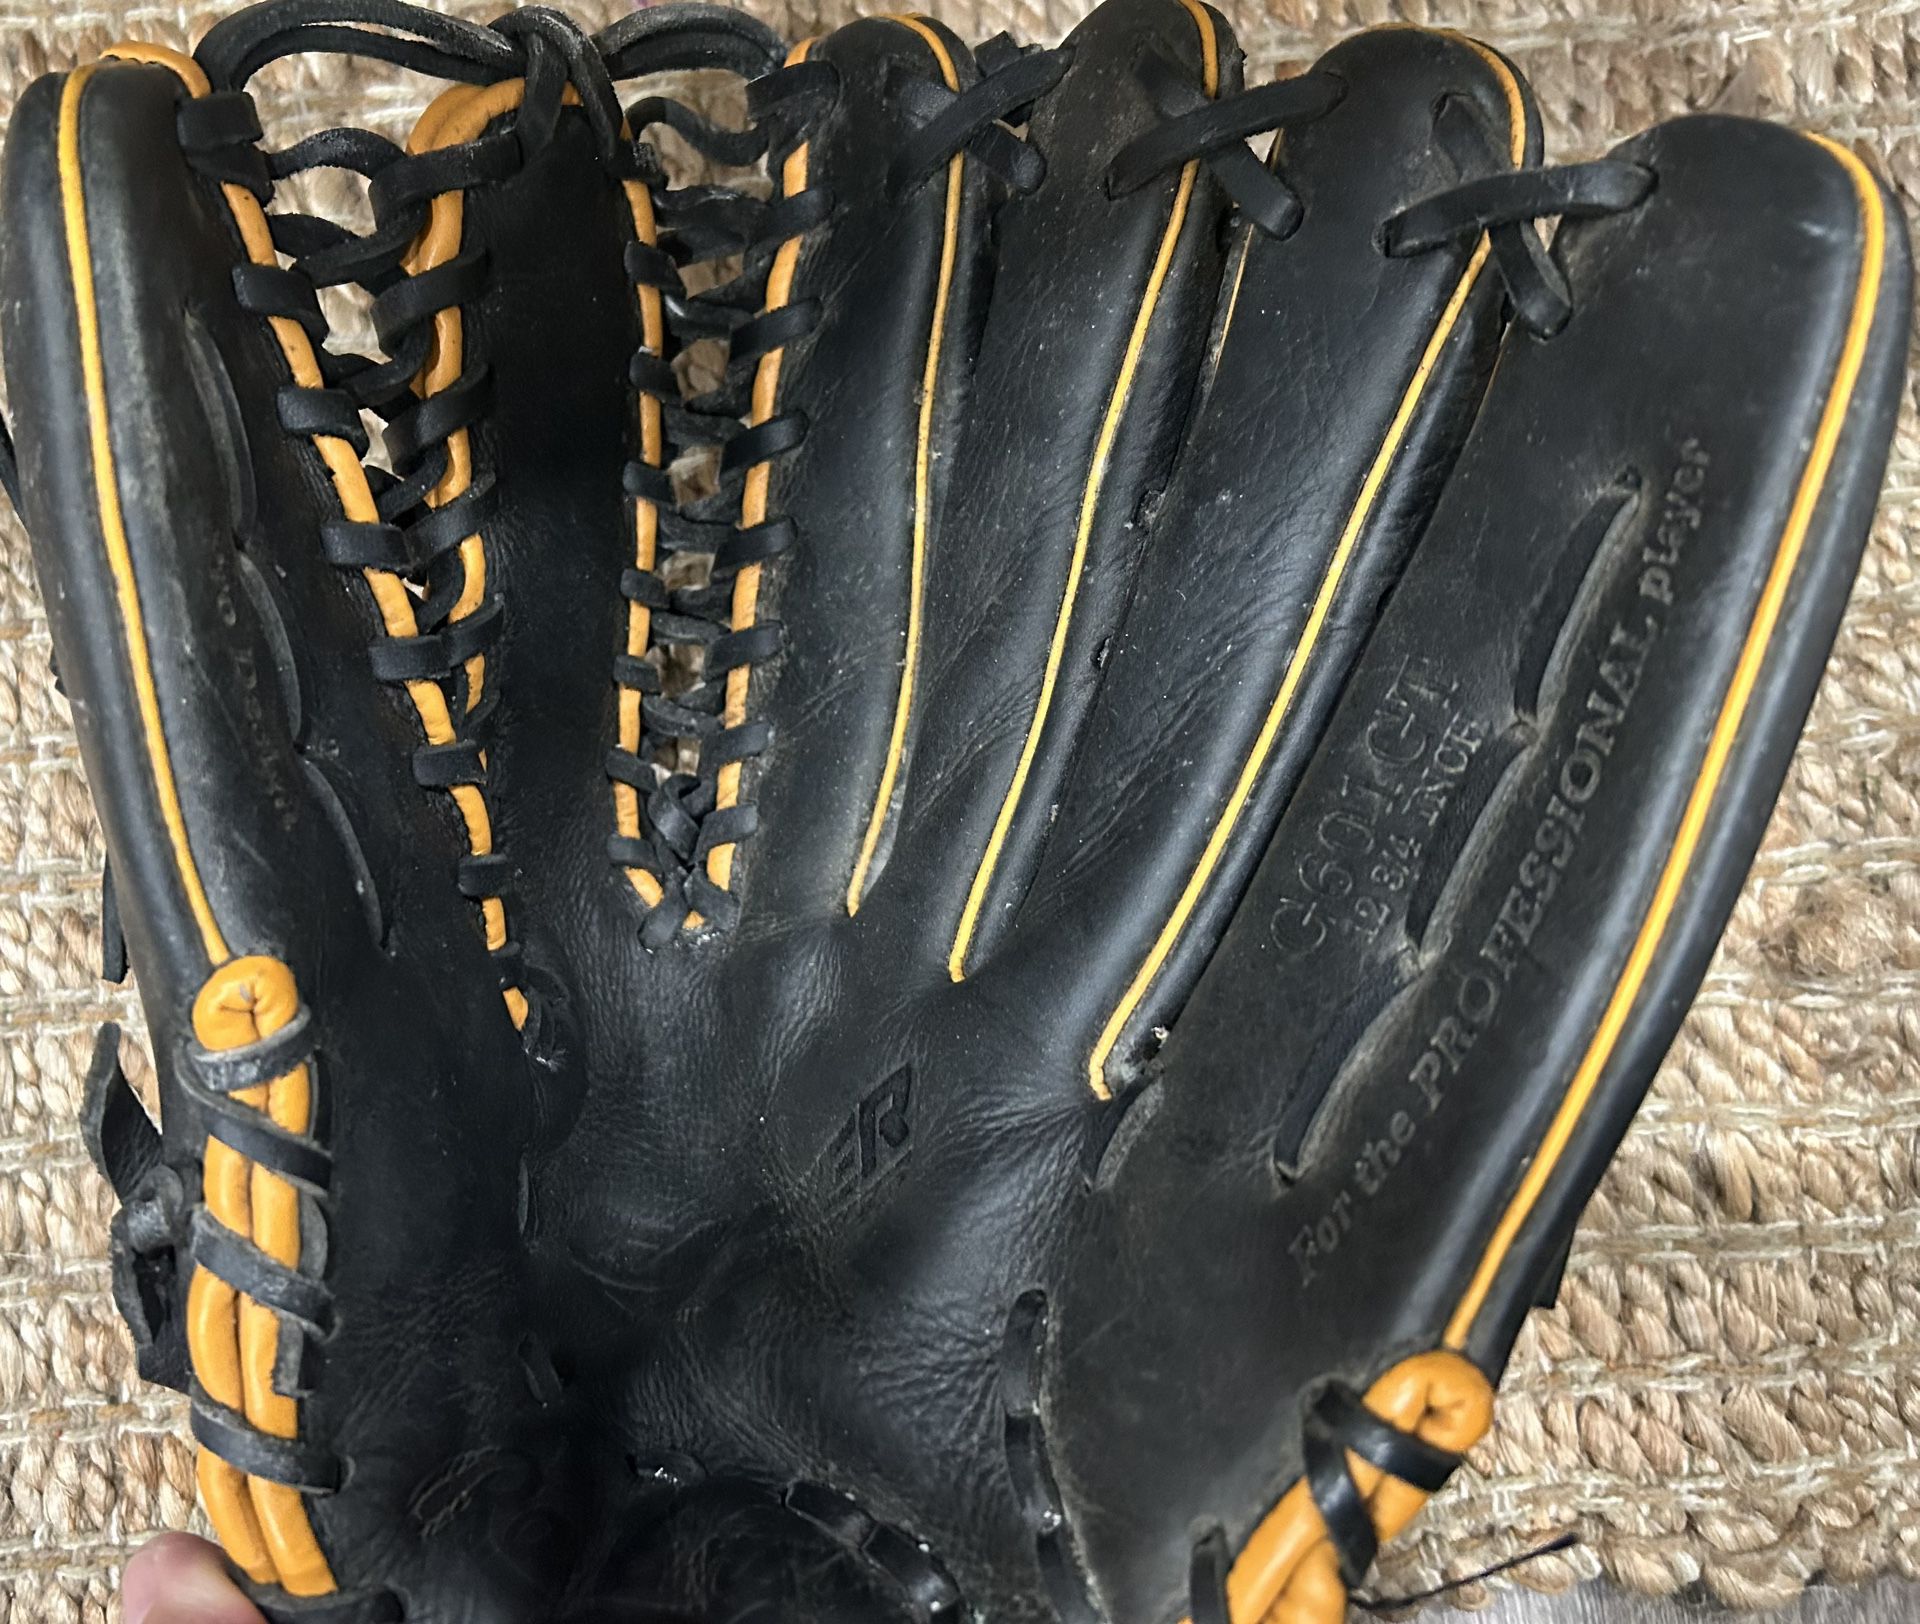 Hi I’m Selling My Baseball Glove , in Excellent condition For Just 100 Dls